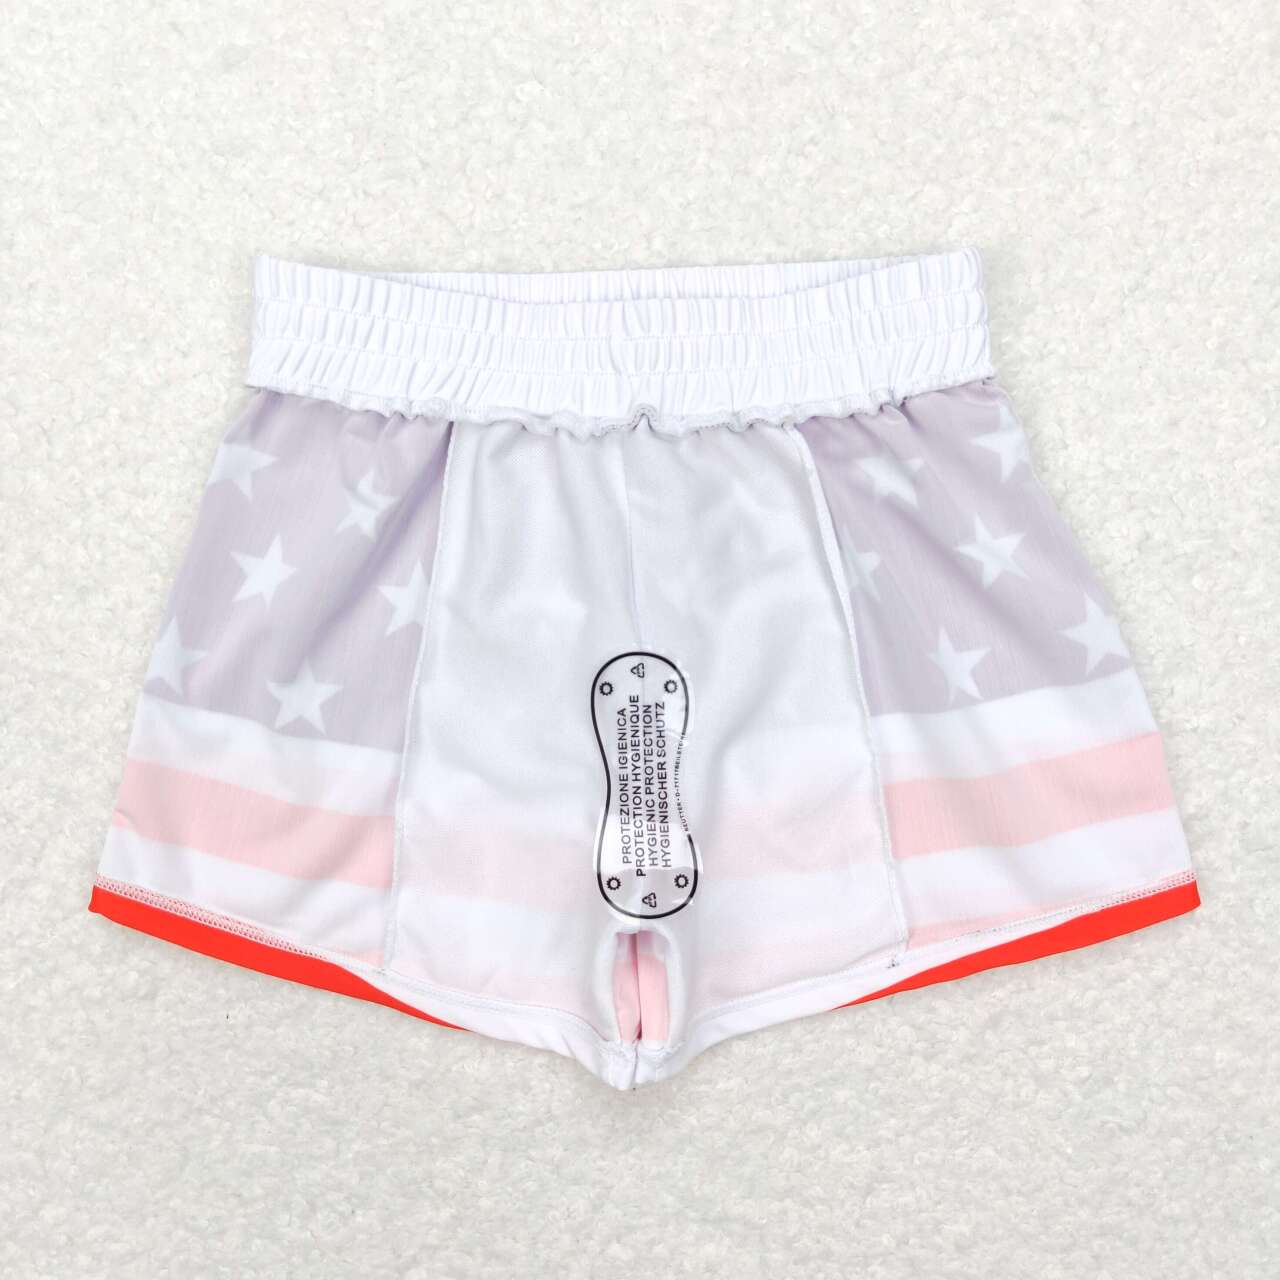 S0188 Five-pointed star red and white striped dark blue swimming trunks